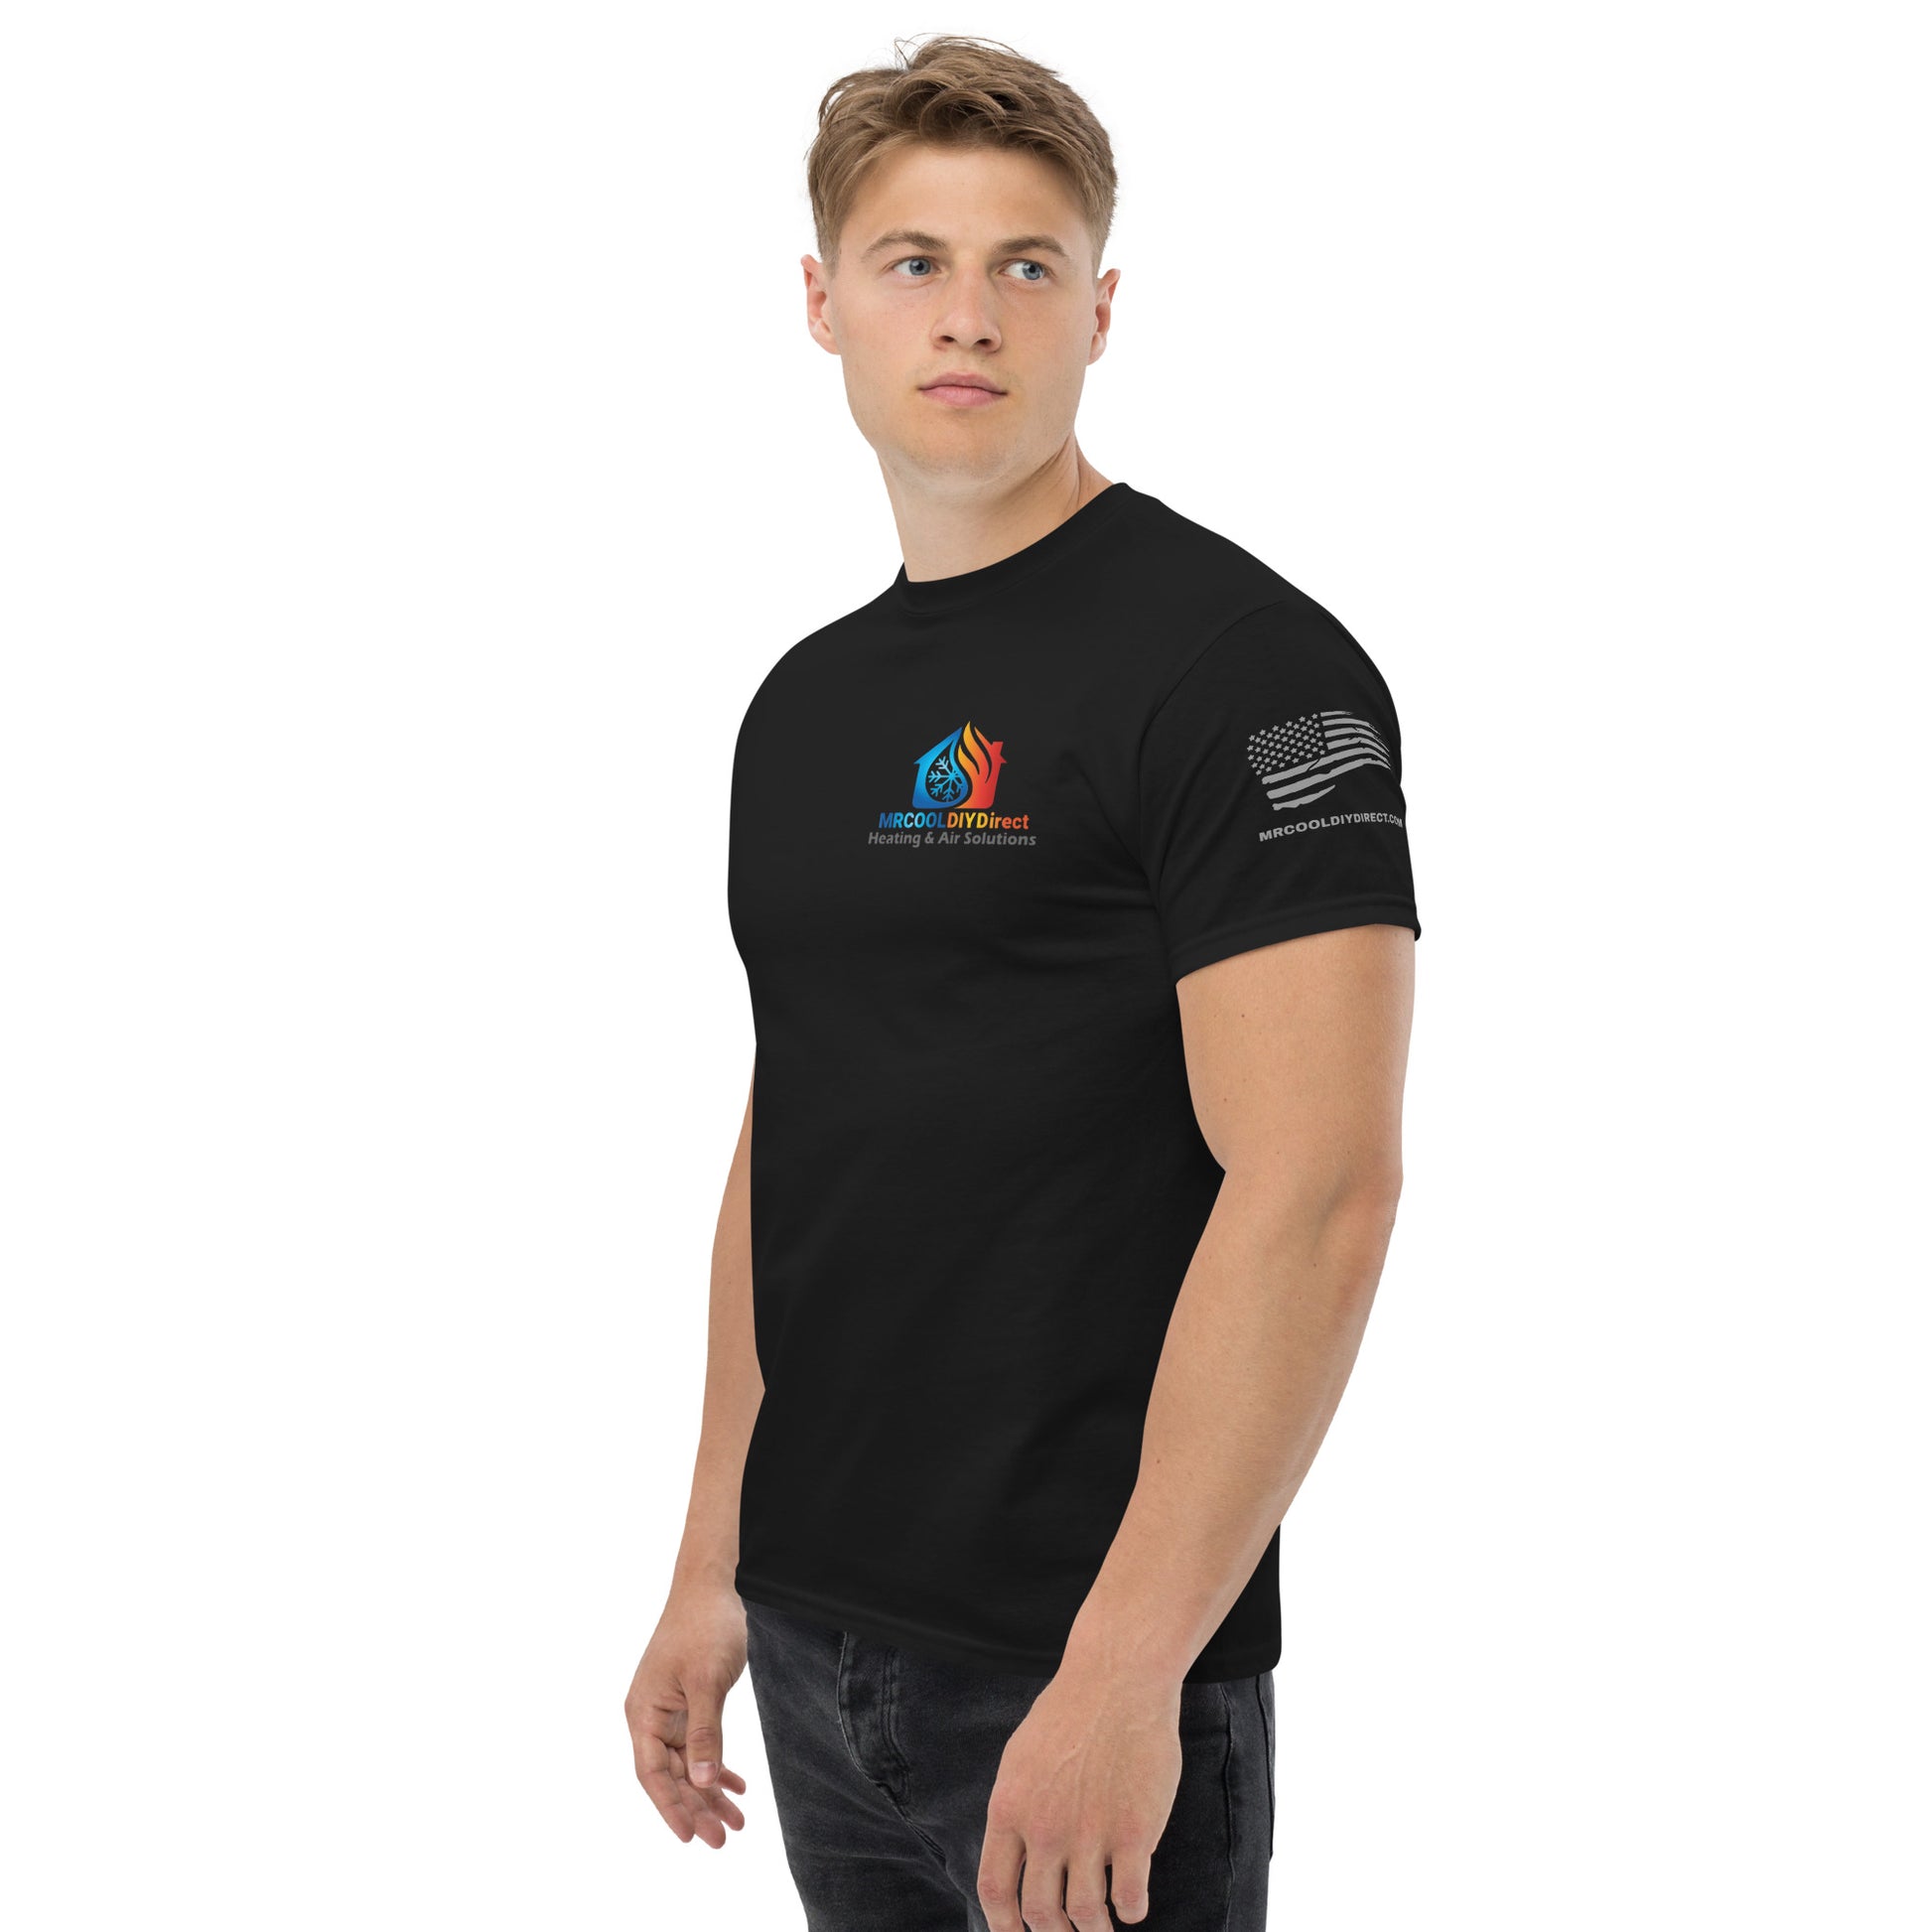 Young man wearing an Exclusive HVAC-Themed Custom Tee by MRCOOL DIY Direct, with a colorful emblem on the chest and a custom-designed flag on the sleeve, standing against a white background.